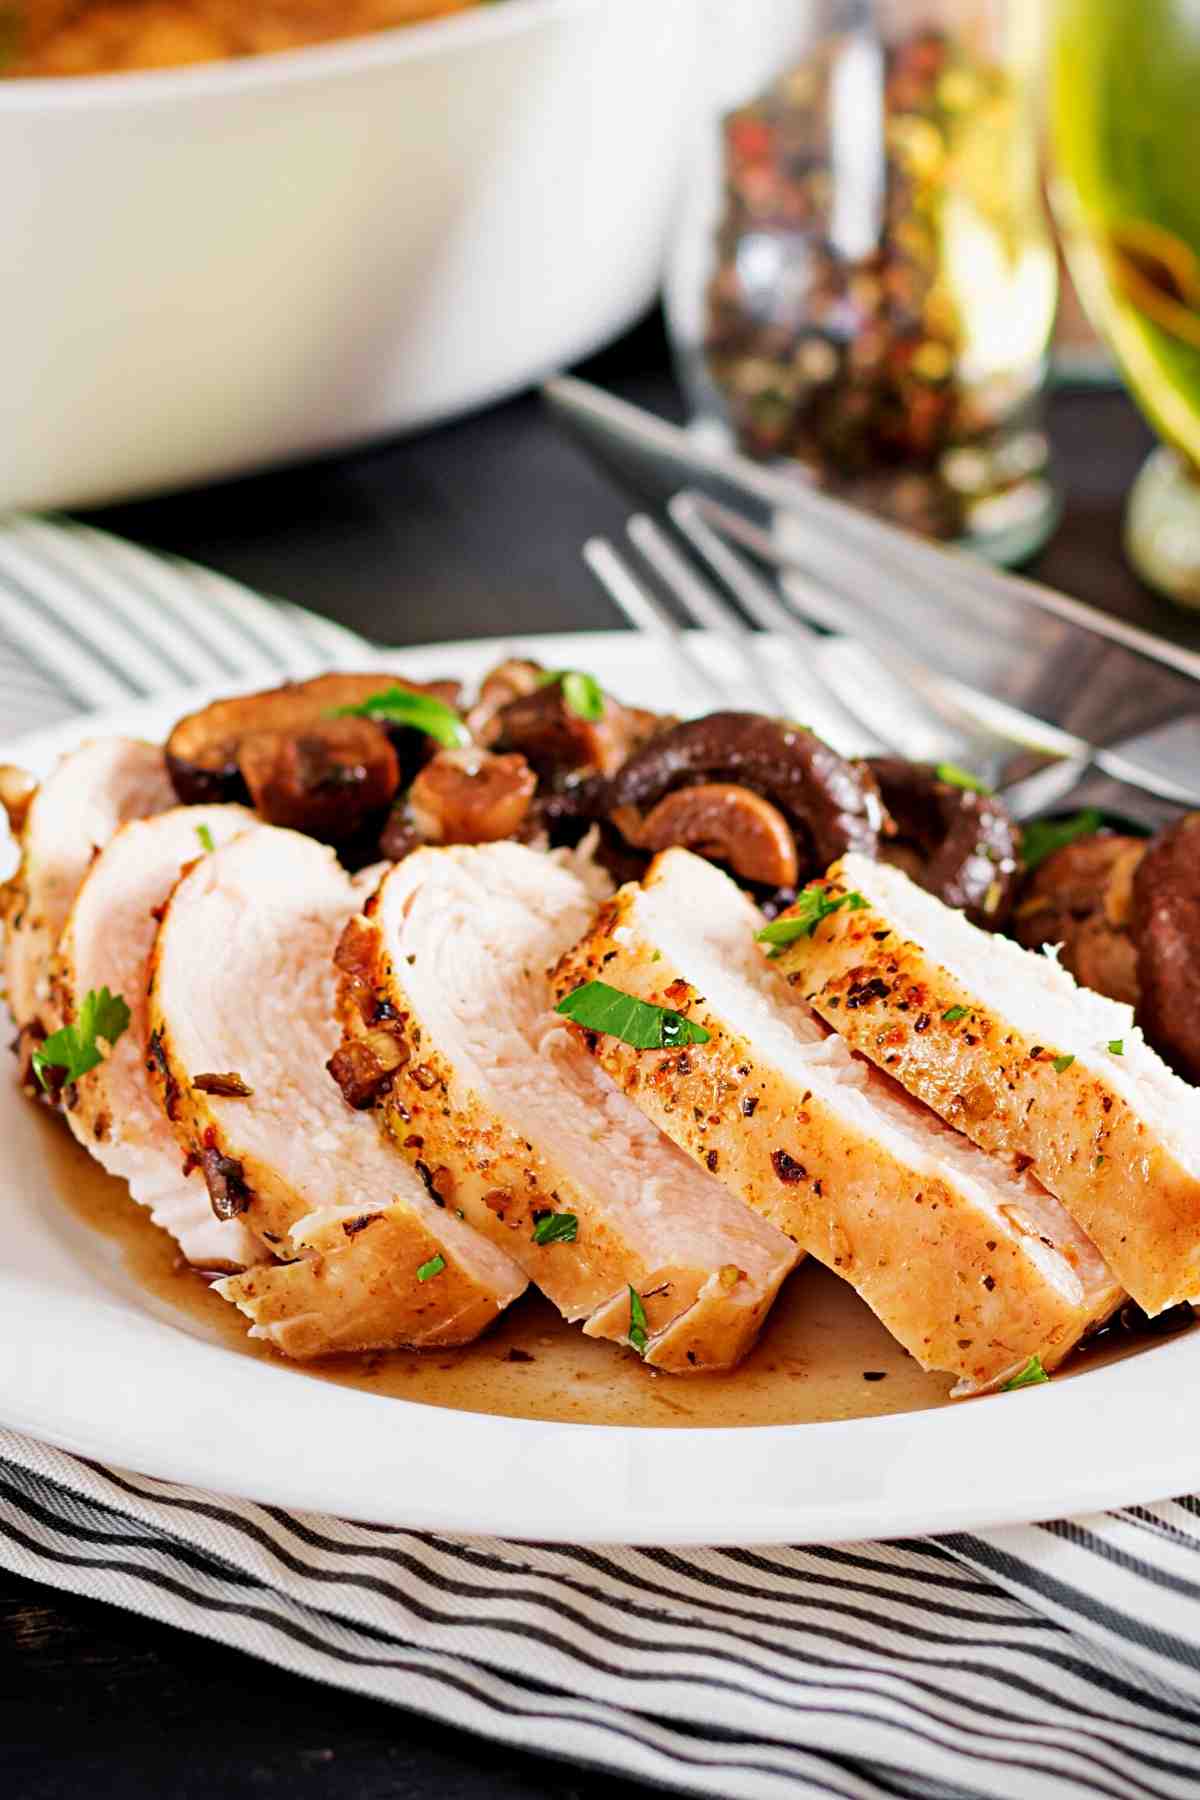 The chicken breast in this recipe includes the rib portion. It’s a juicy part of the breast that adds great flavor. You’ll only need a handful of simple ingredients to make this delicious Baked Chicken Breast With Rib Meat.